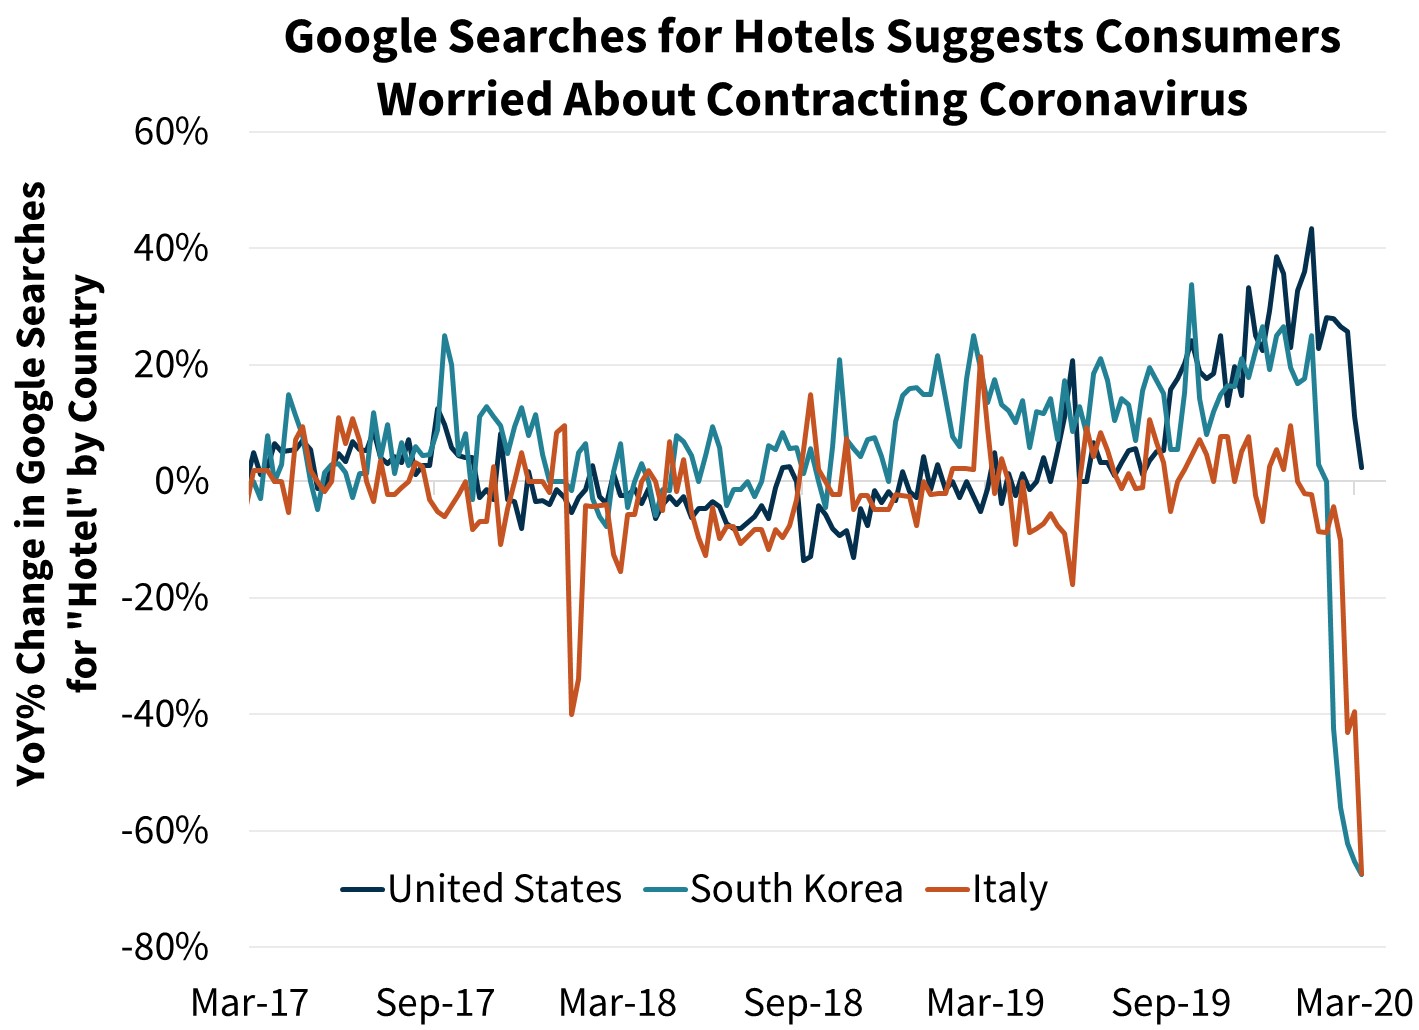 Google Searches for Hotels Suggests Consumers Worried About Contracting Coronavirus